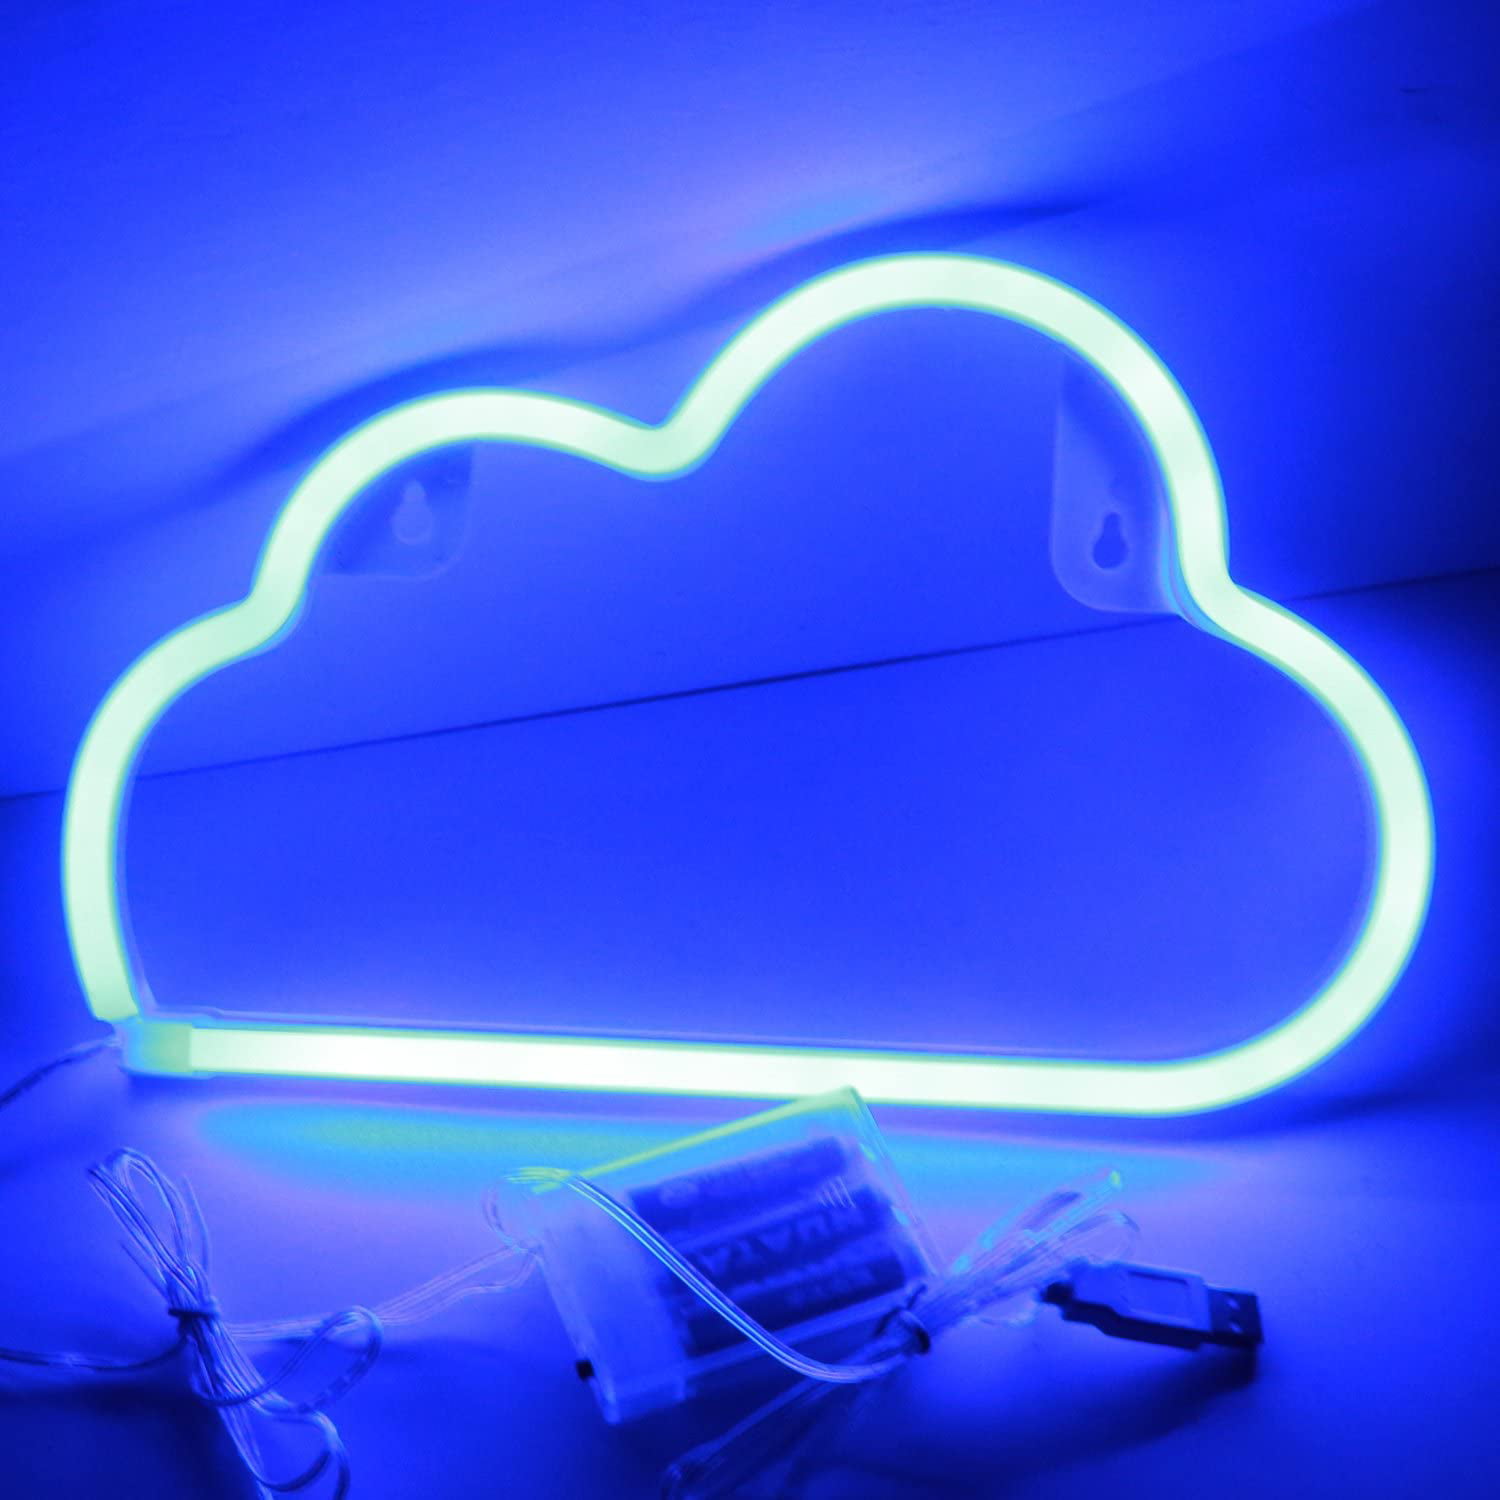 Living Room Party XIYUNTE Cloud Neon Light LED Cloud Lights Neon Signs for Wall Decor White Cloud Neon Signs Light up for Bedroom Christmas Kids Room USB Powered Cloud Light with On/Off Button